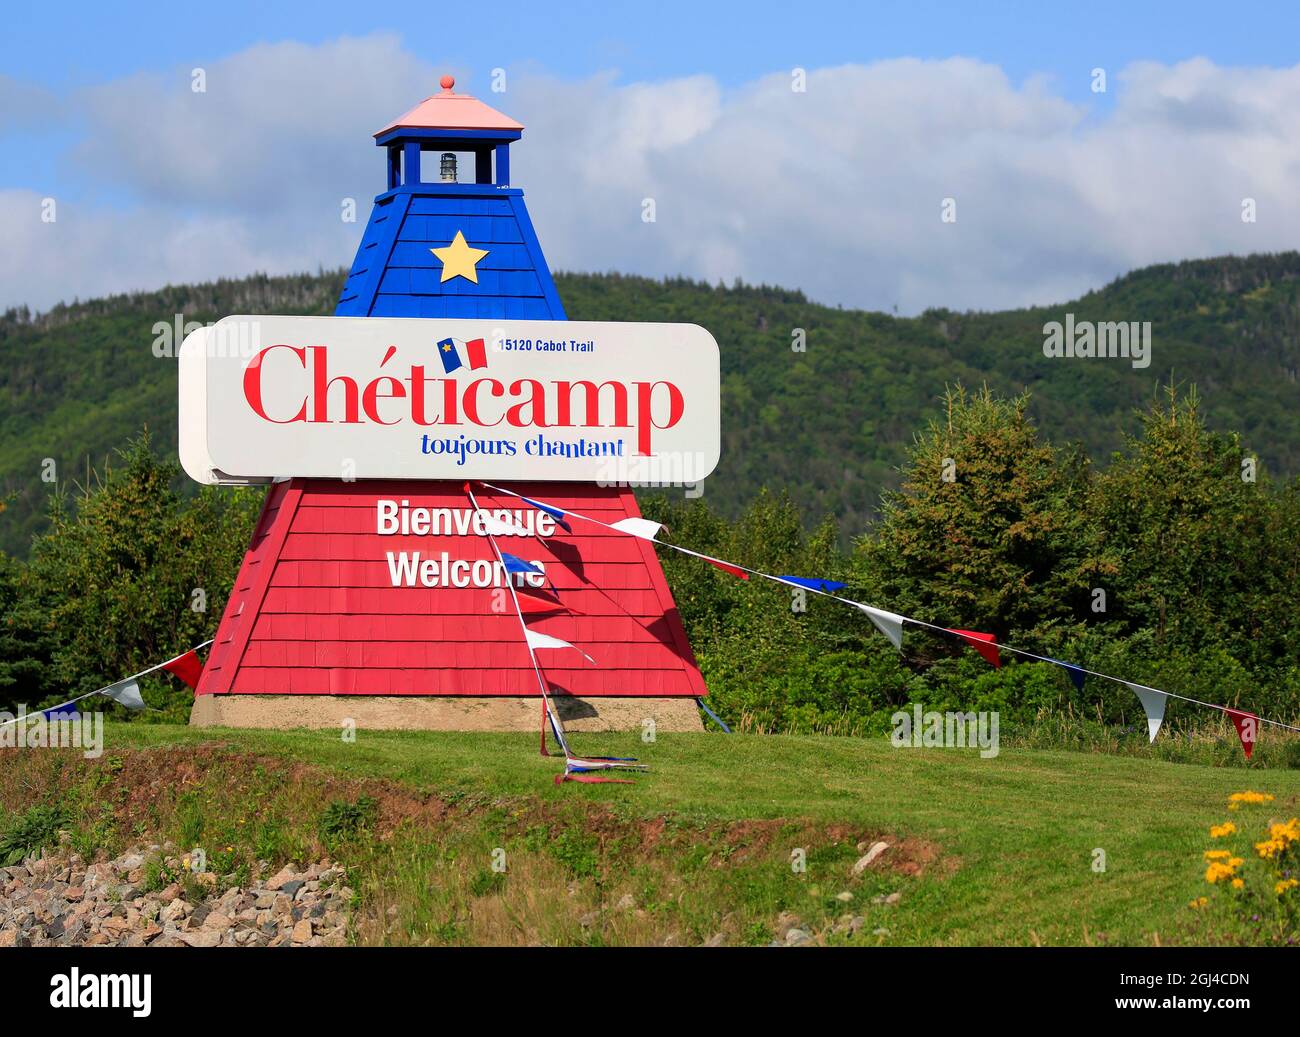 Cheticamp welcome lighthouse in Cabot Trail, Nova Scotia, Canad Stock Photo